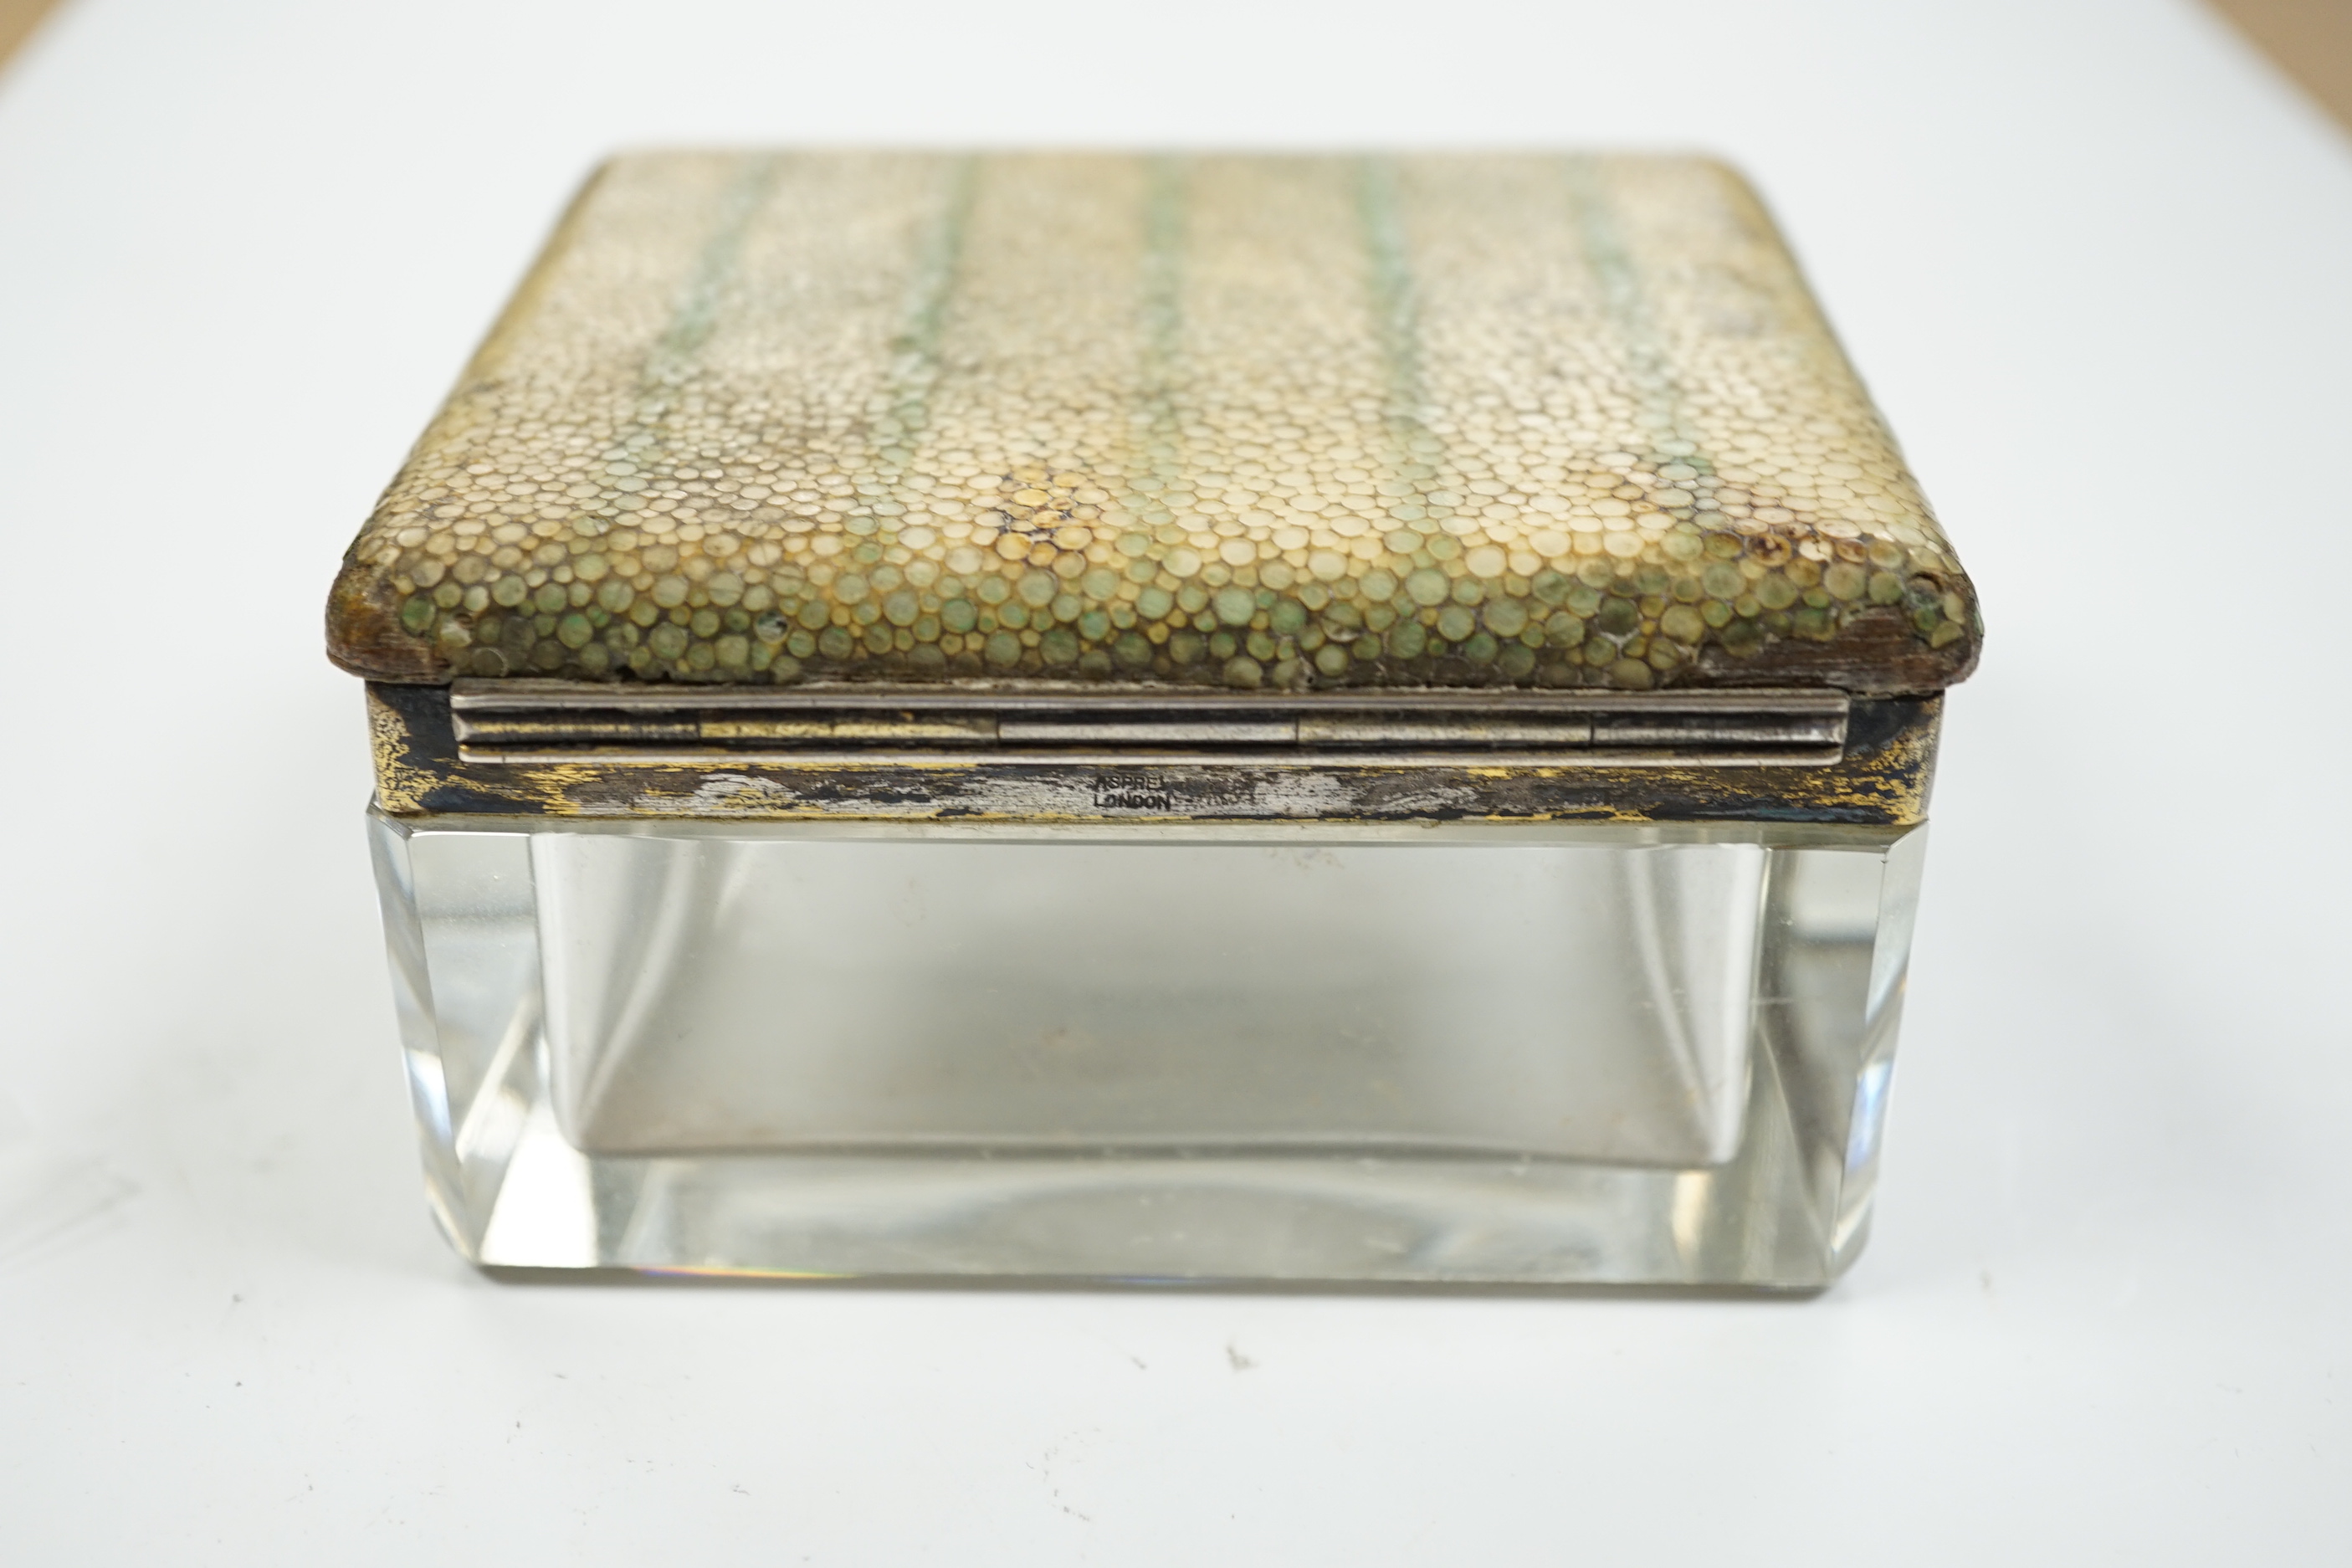 A George V silver and shagreen mounted glass square toilet box, with hinged cover, by George Betjemann & Sons Ltd, London, 1927, retailed by Asprey, London, width 94mm.